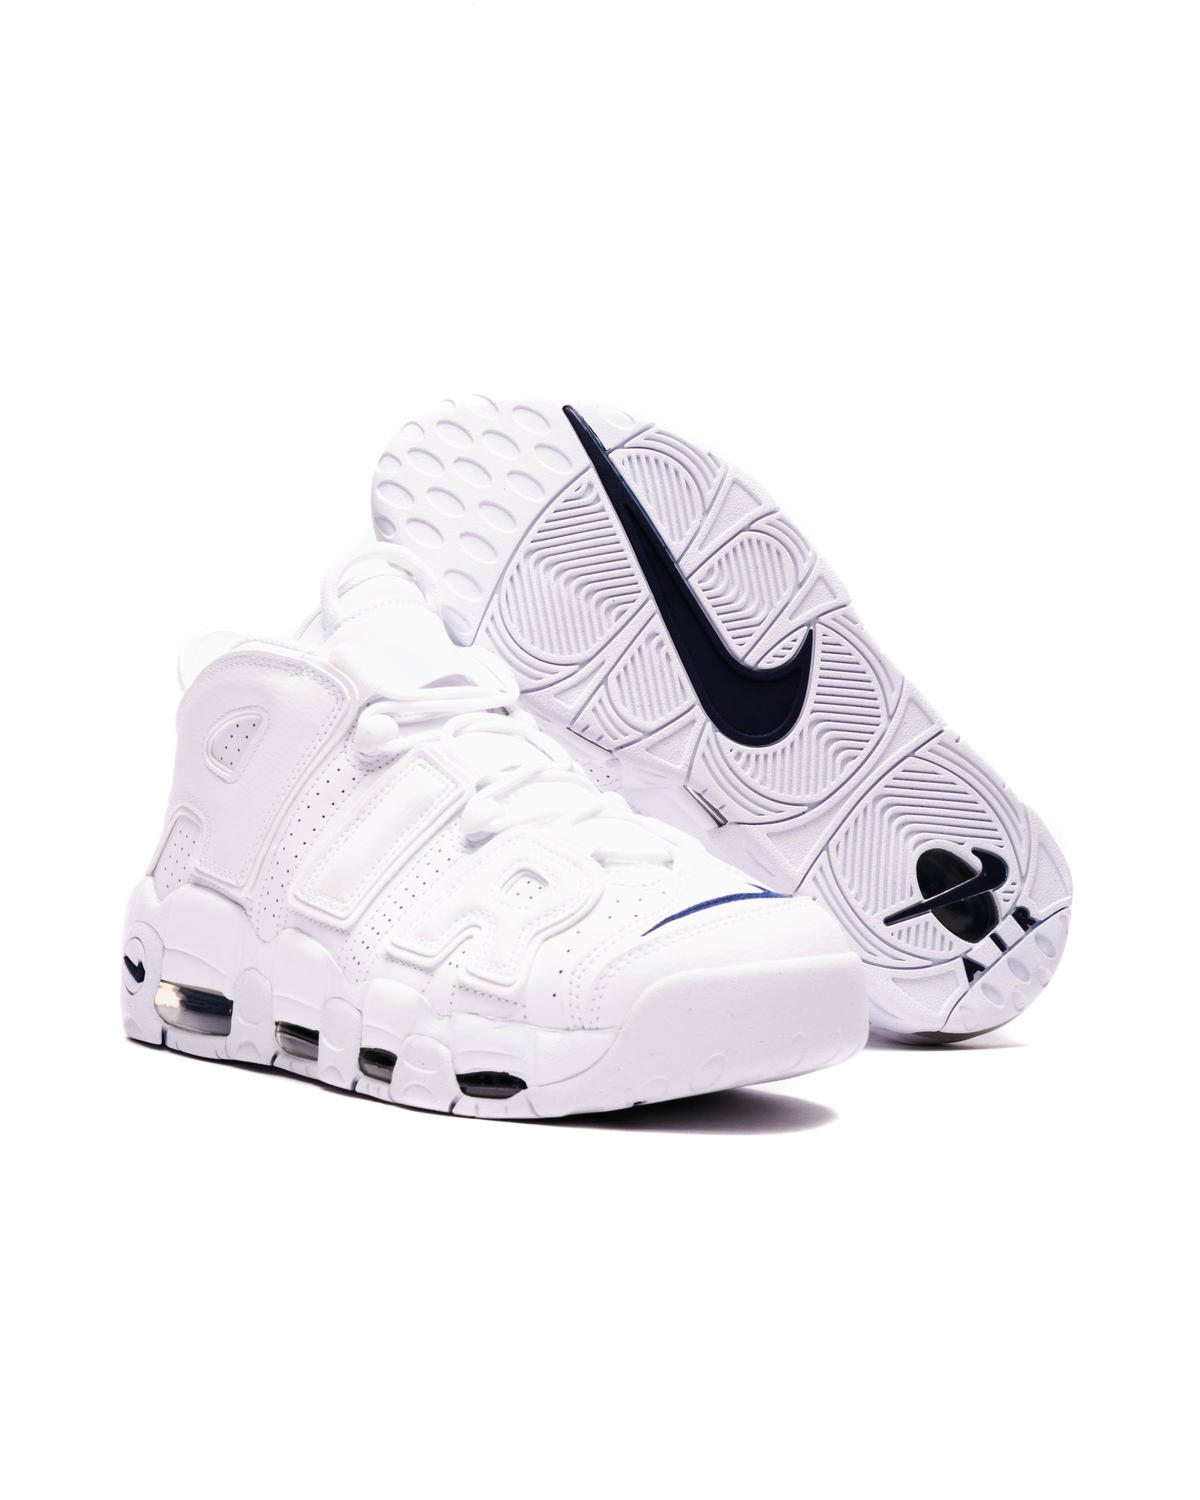 Nike Air More Uptempo White Navy DH8011-100